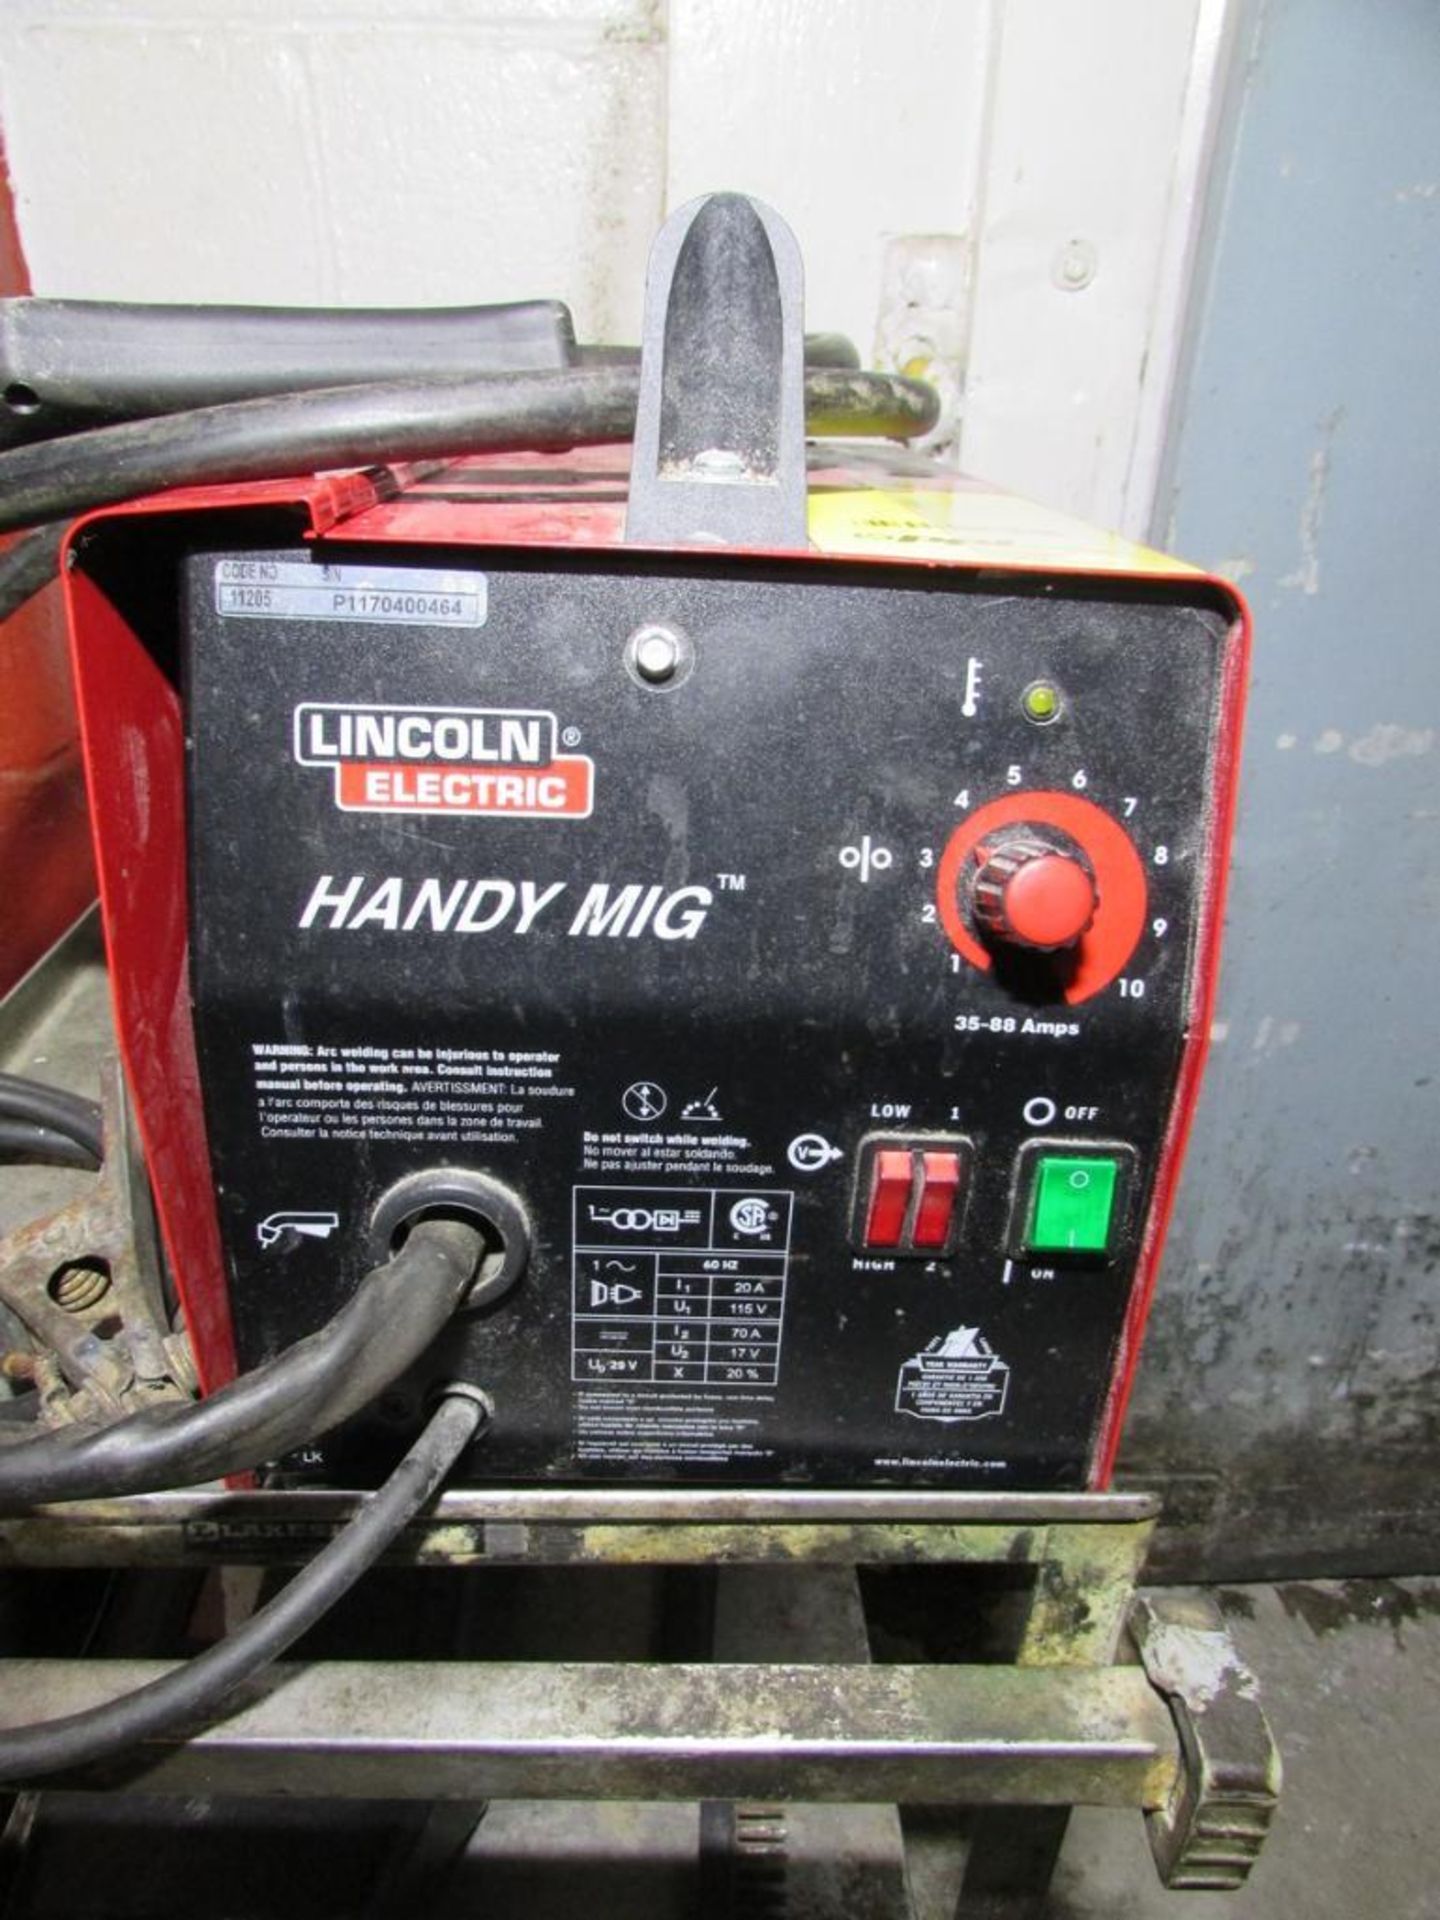 Lincoln Electric Handy MIG Wire Welder. 35-88A, 70A 17V 20% Duty Cycle Output, 115V 20A 60Hz 1PH Inp - Image 2 of 7